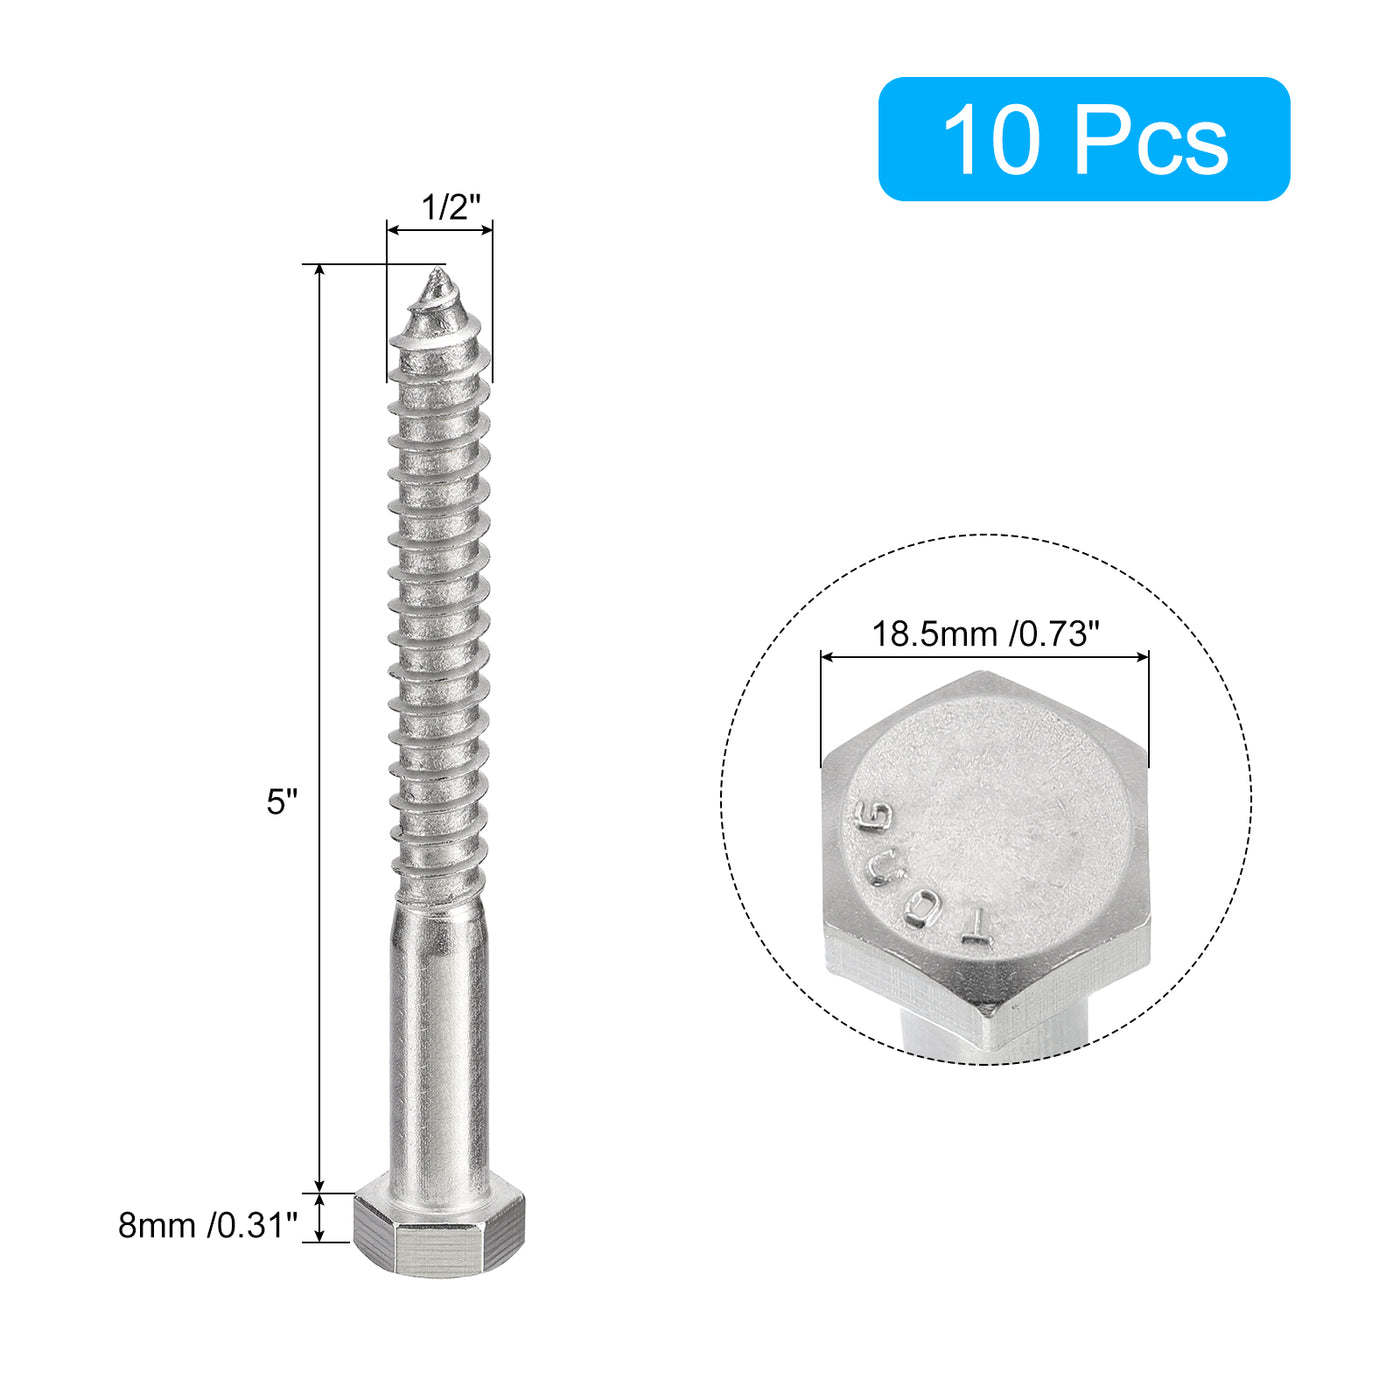 uxcell Uxcell Hex Head Lag Screws Bolts, 10pcs 1/2" x 5" 304 Stainless Steel Wood Screws